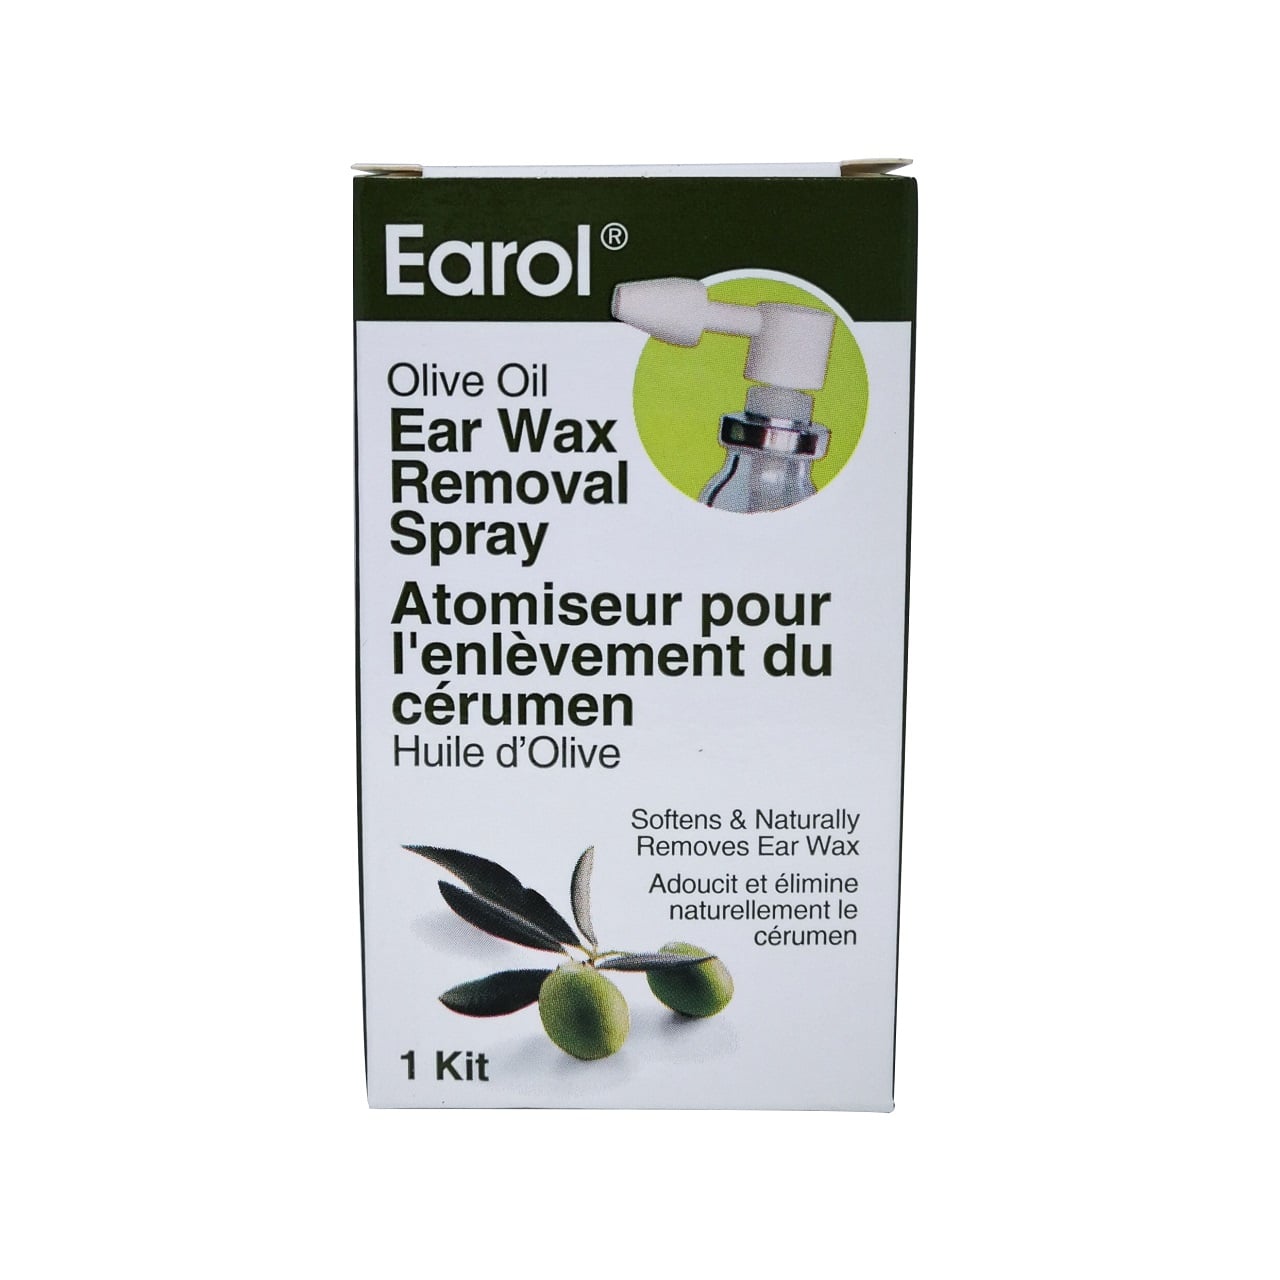 Product label for Earol Olive Oil Ear Wax Removal Spray Kit